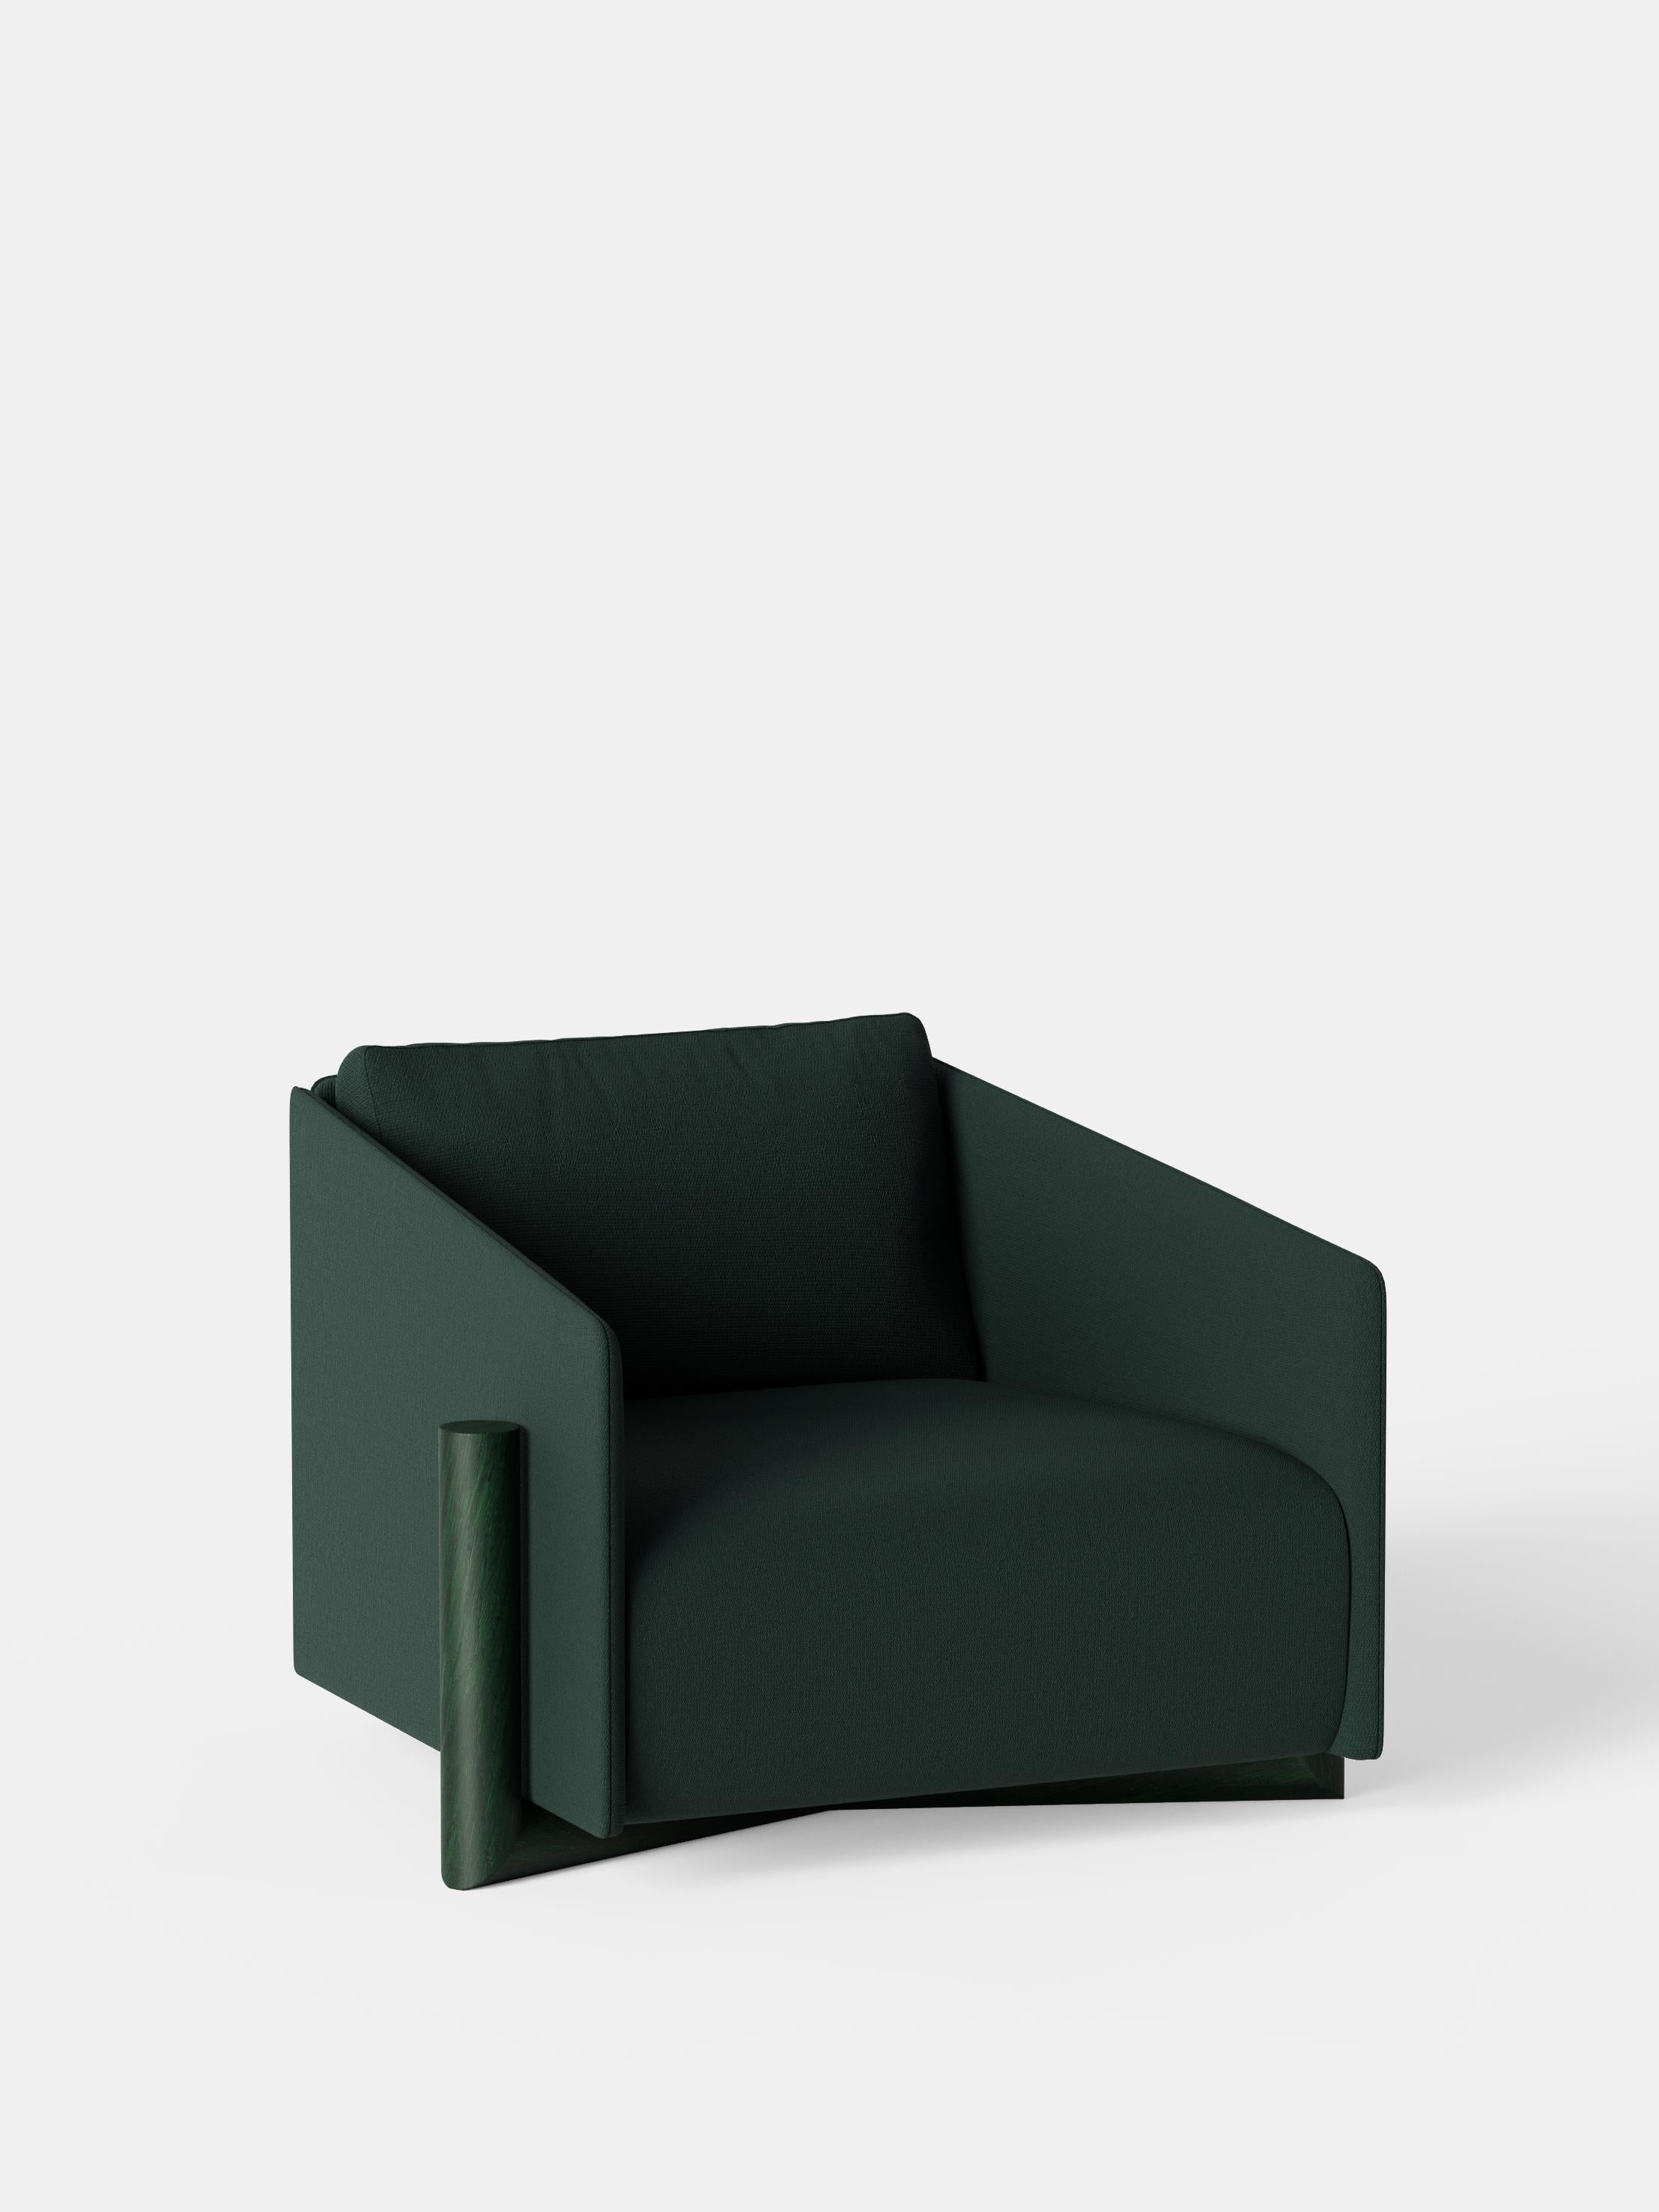 Green Timber Armchair by Kann Design
Dimensions: D 104.5 x W 93 x H 75 cm.
Materials: Solid green oak base, wood frame, elastic belts, HR foam, fabric upholstery Kvadrat Vidar 1062 (94% wool, 6% nylon).
Available in other fabrics.

The strong